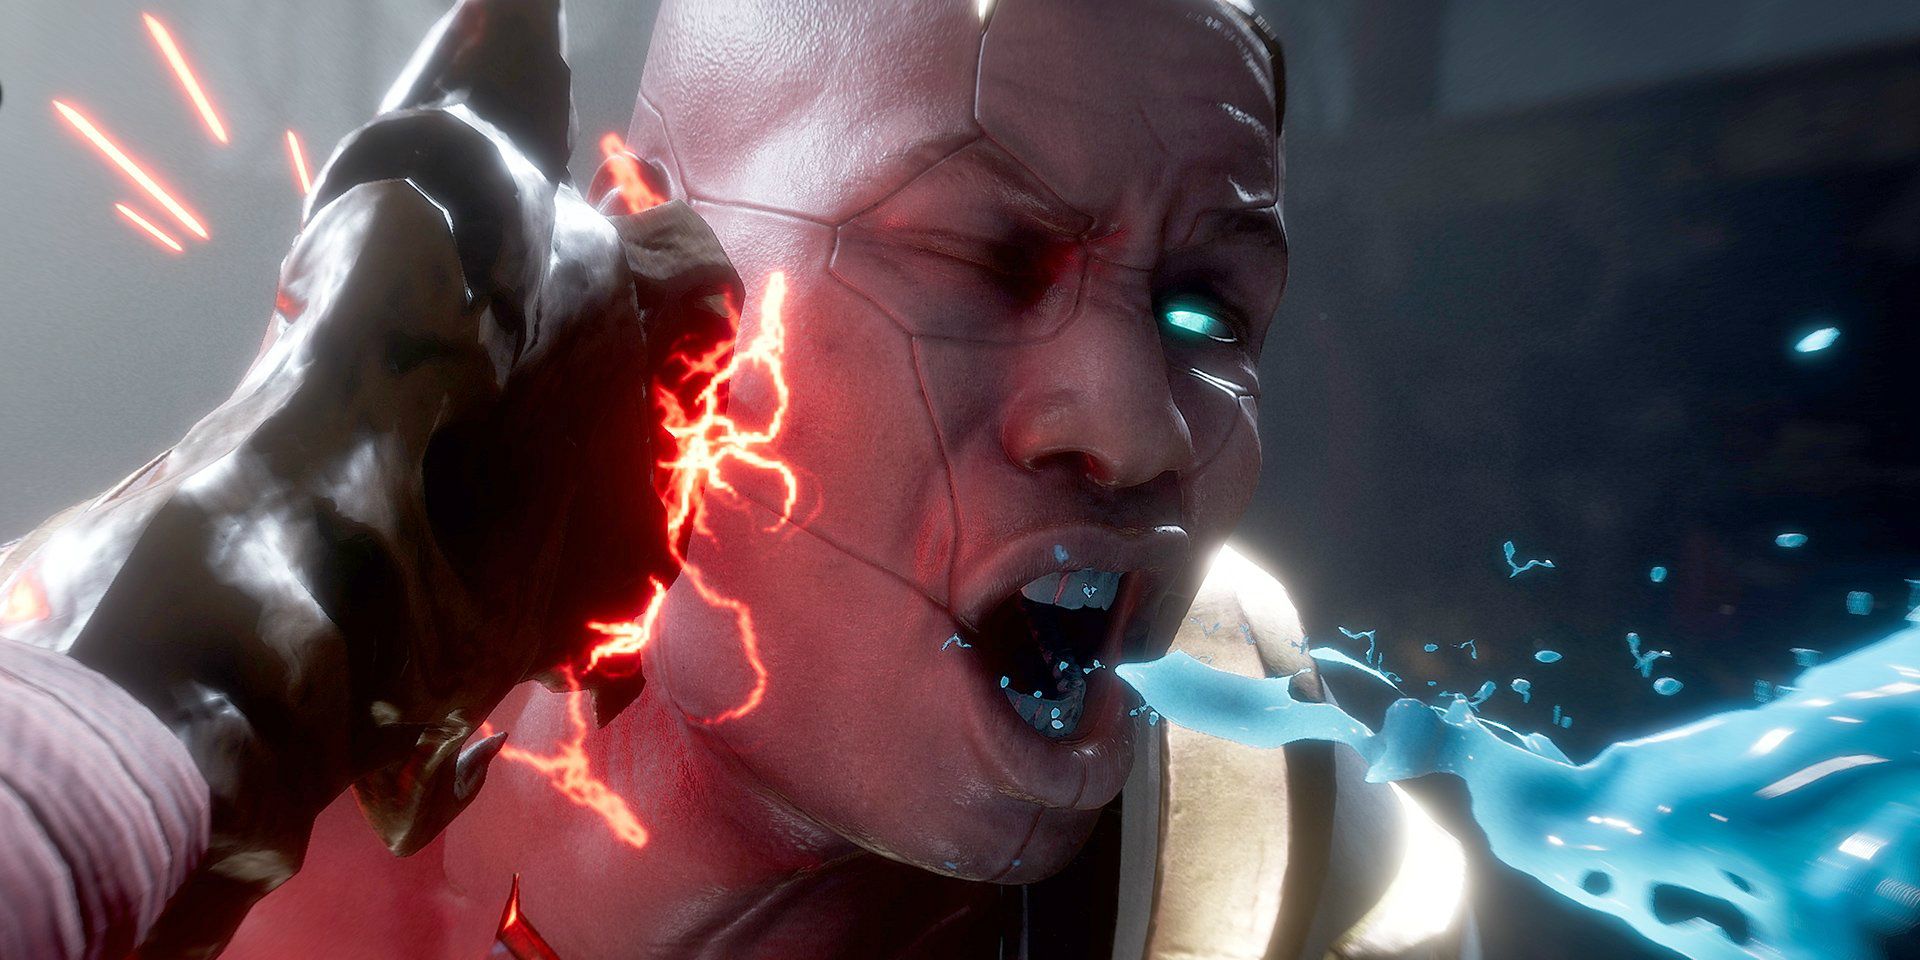 Mortal Kombat 11': Every Fatality, Brutality, and Fatal Blow